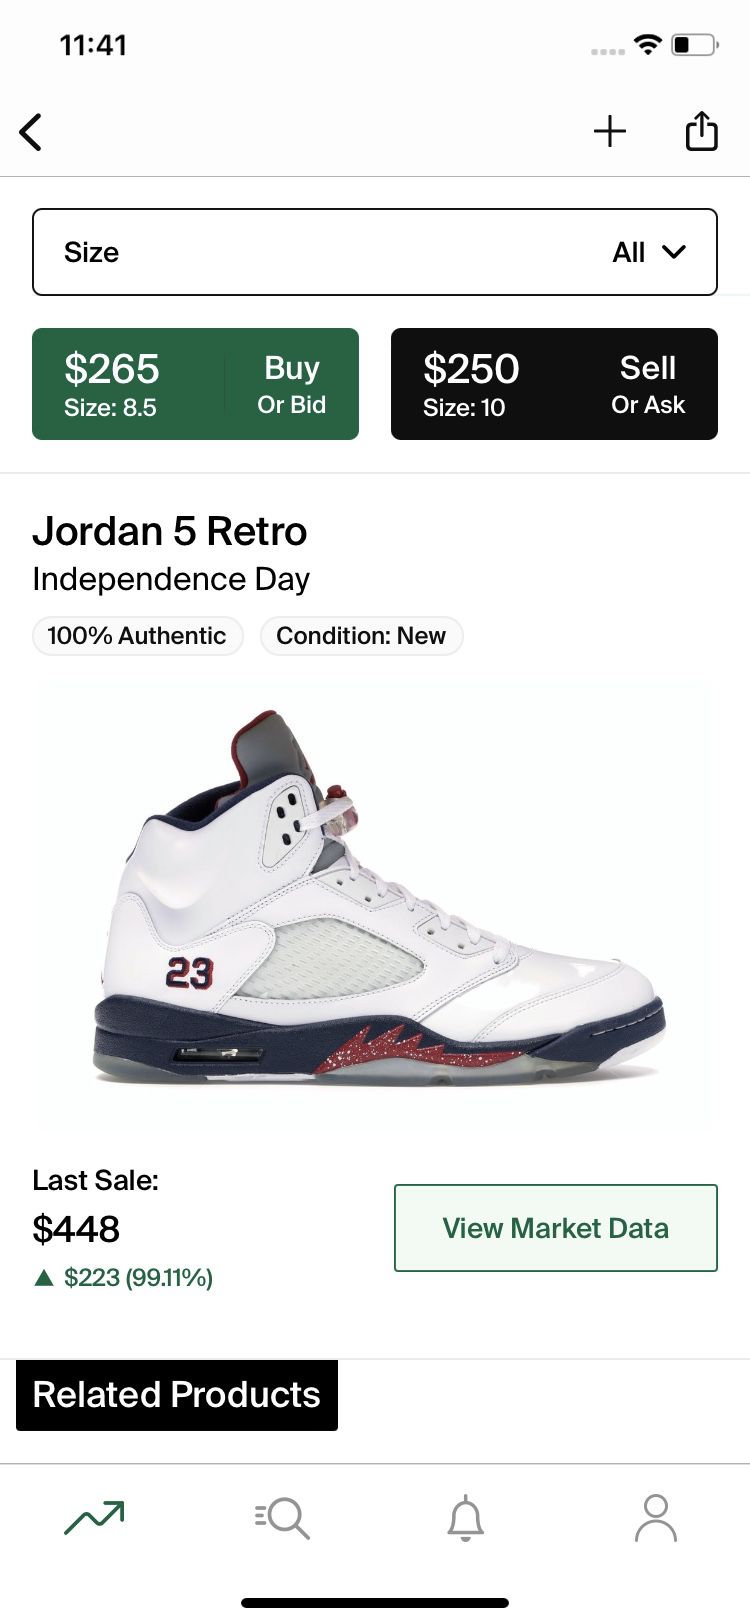 Jordan’s 5s Independence Day Size 8.5